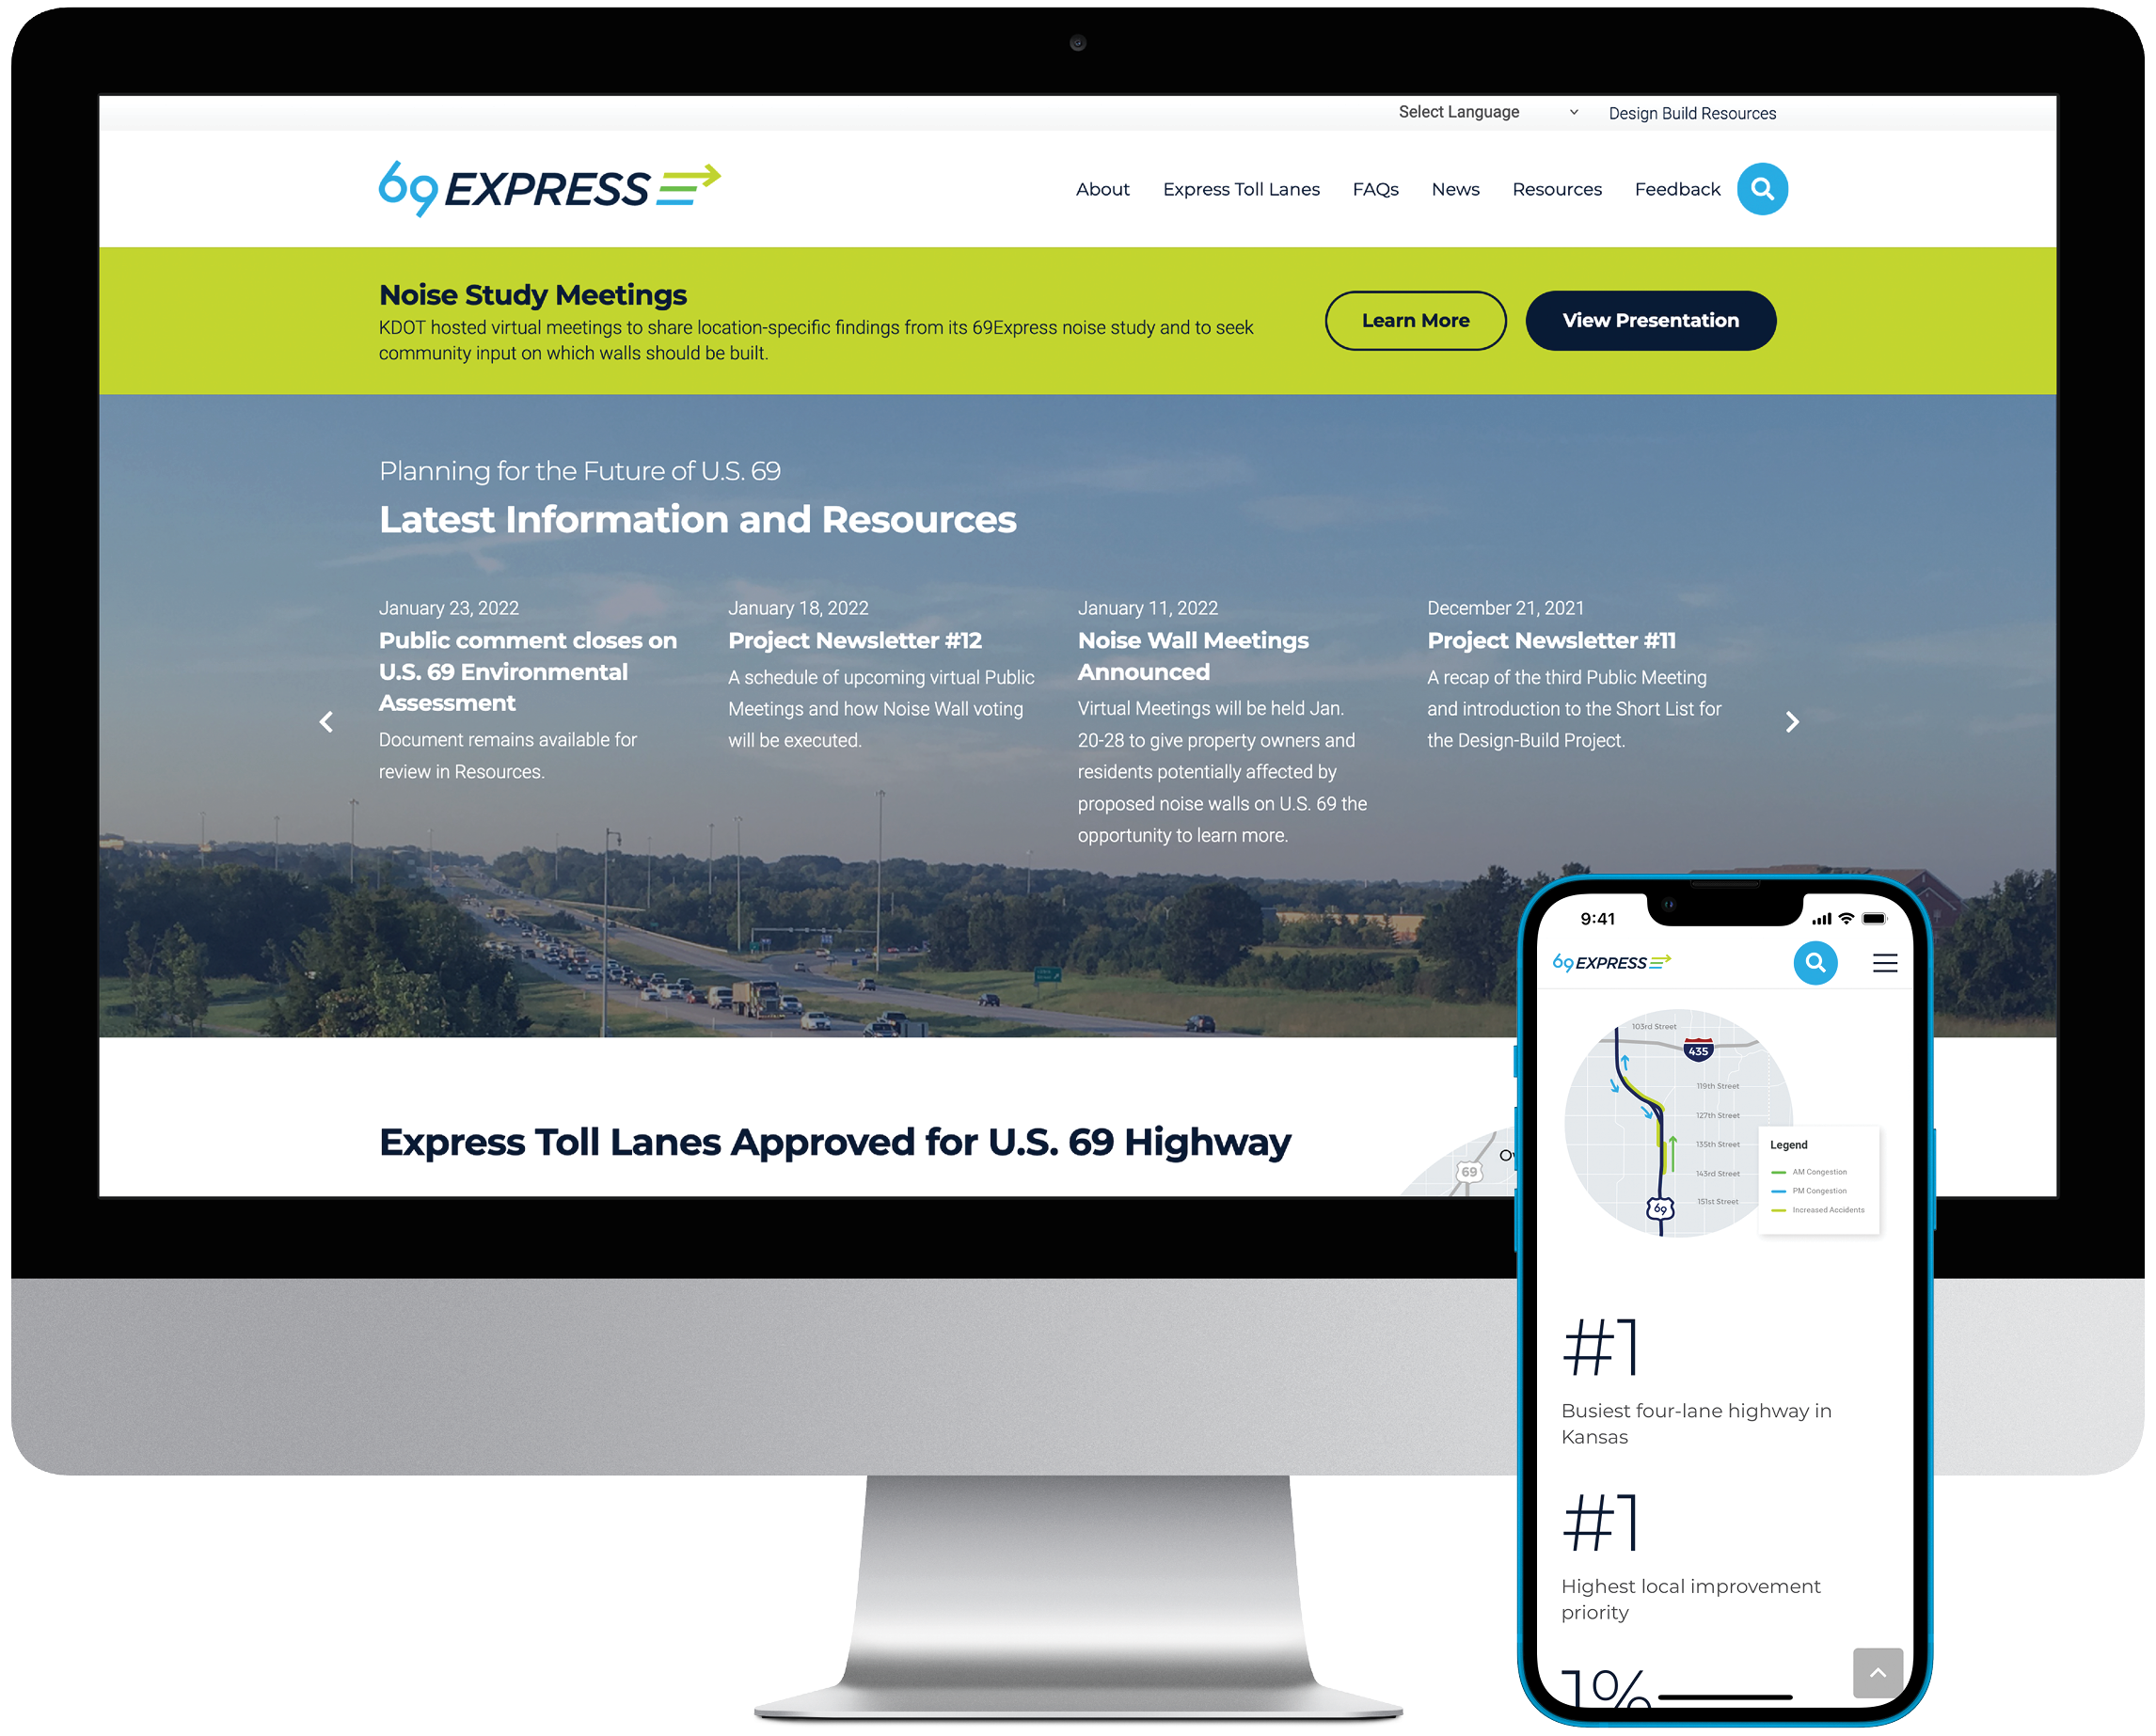 69Express homepage on desktop and mobile device